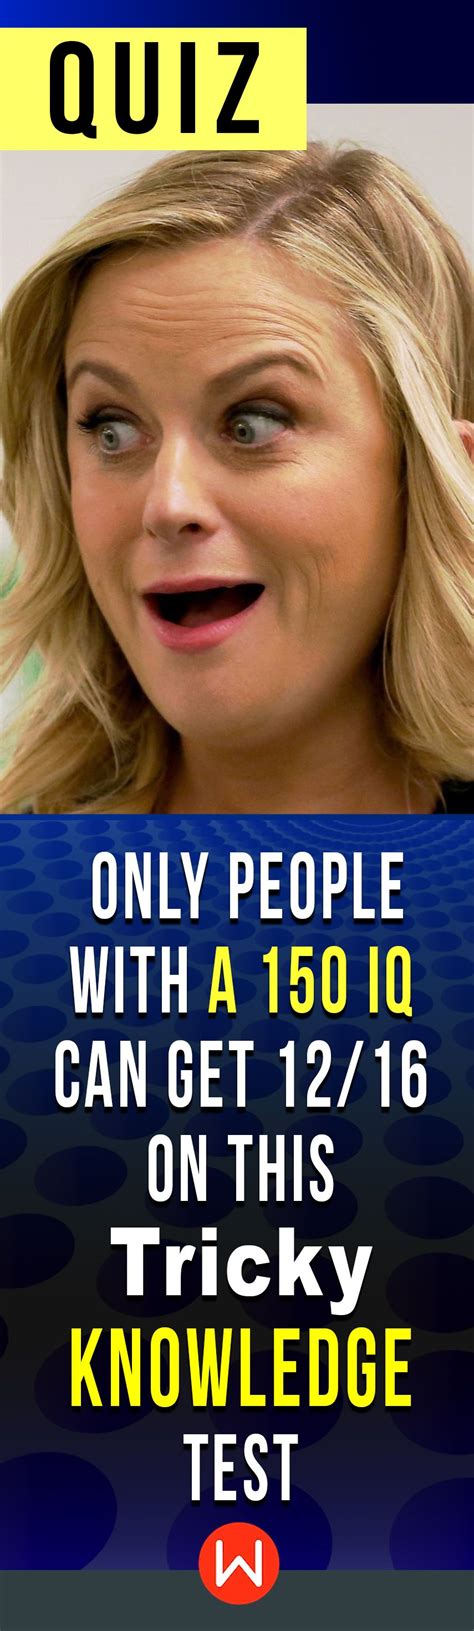 quiz only people with a 150 iq can get 12 16 on this tricky knowledge test knowledge test